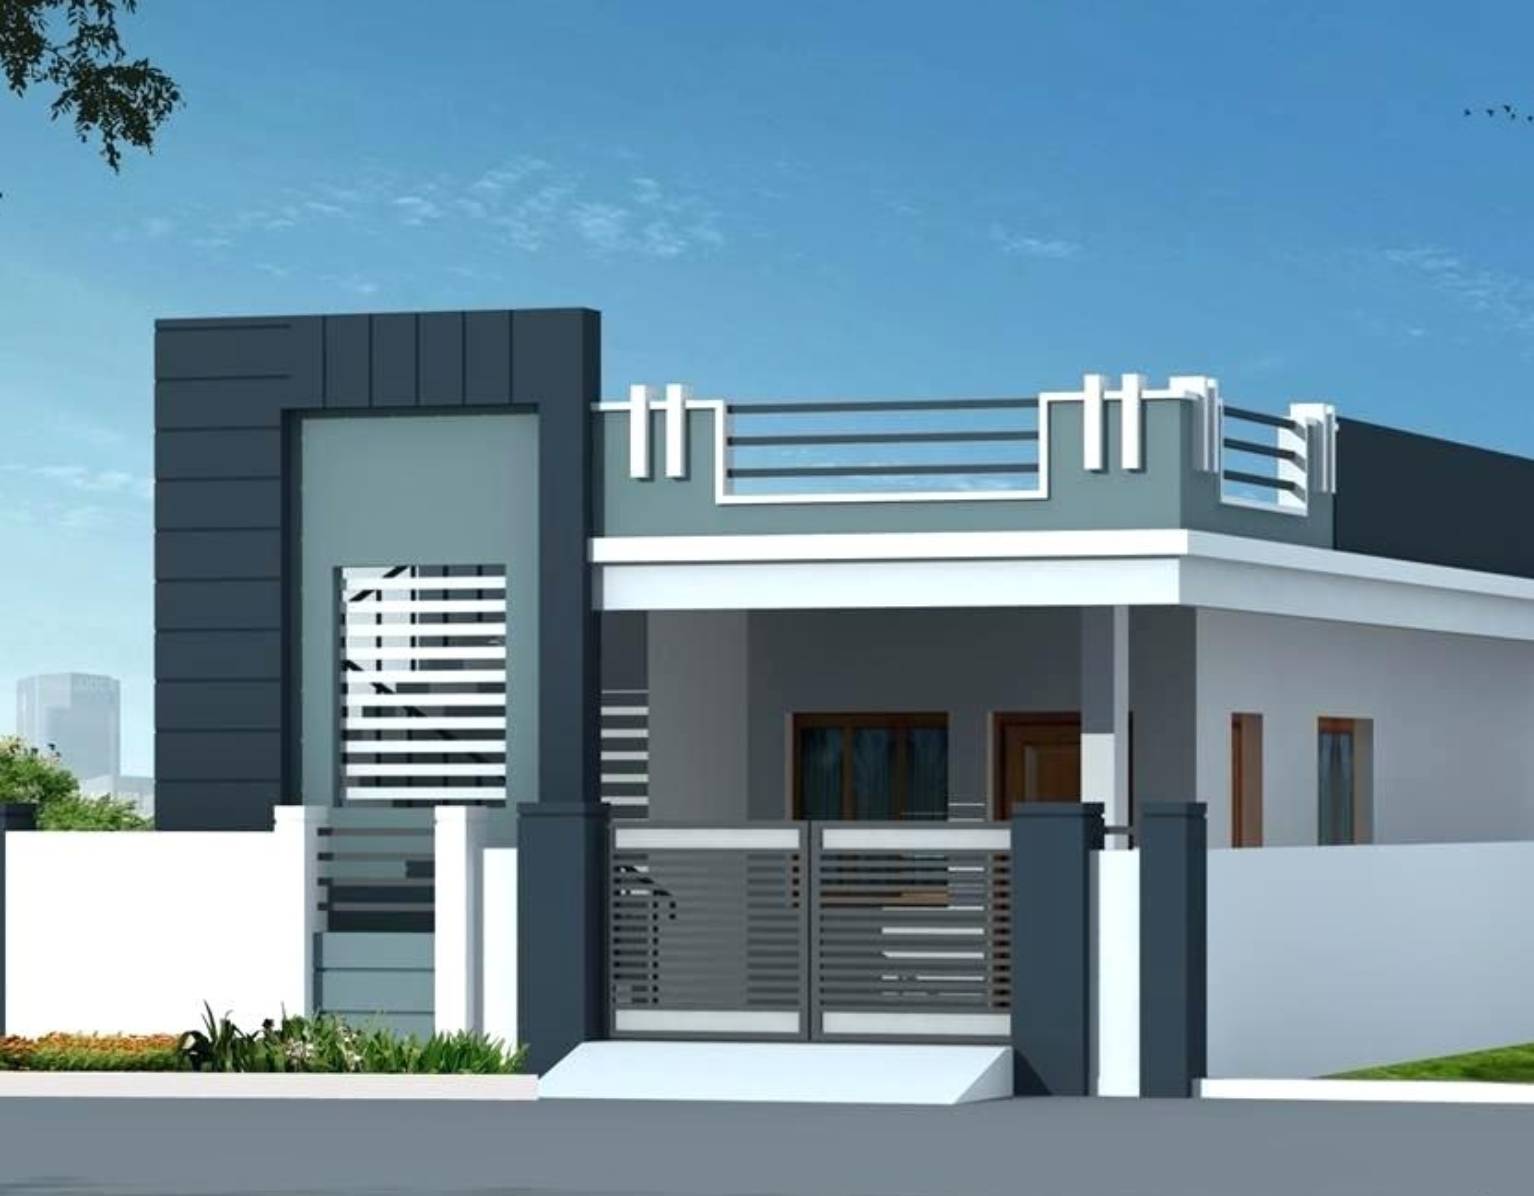 Real Value Land Promoters and Builders | Builders & Promoters | 1 BHK Villa | 2 BHK Villa | 3 BHK Villa | Villas | Coimbatore| Pattanam | Singanallur |Pattanam | Tamilnadu - Builders in Coimbatore, Best builders in Coimbatore, Top builders in Coimbatore, Coimbatore builders, famous builders in Coimbatore, promoters in Coimbatore, House builders in Coimbatore,House builders, New house builders in coimbatore, Homes builders in coimbatore,Homes builders, New homes builders in Coimbatore, Leading builders in Coimbatore, Home builders in Coimbatore, home builders, best home builder in Coimbatore, builder, coimbatore builders list, best builders Coimbatore,New house builders in coimbatore, reliable builders in Coimbatore, Real Value  builders,Real Value  homes builders, Real Value  builders in Coimbatore, Real Value  builders Coimbatore,Real Value  developers builders Coimbatore, residential builders in Coimbatore, fastest growing builders in Coimbatore, Best Constructors in Coimbatore, Best Promoters in Coimbatore, Best Construction Builders in Coimbatore, Contractors in Coimbatore, Property Developers In Coimbatore,Builders,Property in coimbatore,Developers in coimbatore, Real Value  developers in coimbatore, Residential Builder in Coimbatore, Residential Construction in Coimbatore,Residential in coimbatore,Construction, best builders in India, Best villas promoters in Coimbatore, Best villas promoters in Coimbatore, Best budget houses in Coimbatore, best construction companies in Coimbatore, builders in Coimbatore, Real Value , Real Value  Housing in Coimbatore, Best Construction in Coimbatore, Best Construction in Coimbatore, Flats in Coimbatore, Best individual Developers in Coimbatore, Best individual houses in Coimbatore, individual houses in Coimbatore, Best real estate in Coimbatore, best builders and constructions in Coimbatore, Coimbatore builders, Coimbatore builders, Coimbatore construction company, Developers in Coimbatore, Best Developers in Coimbatore, Best plots in Coimbatore, Best flats for sale in Coimbatore, properties in Coimbatore, property for sale in Coimbatore, Best luxury Developers in Coimbatore, independent house for sale in Coimbatore, residential plots in Coimbatore, Coimbatore house for rent